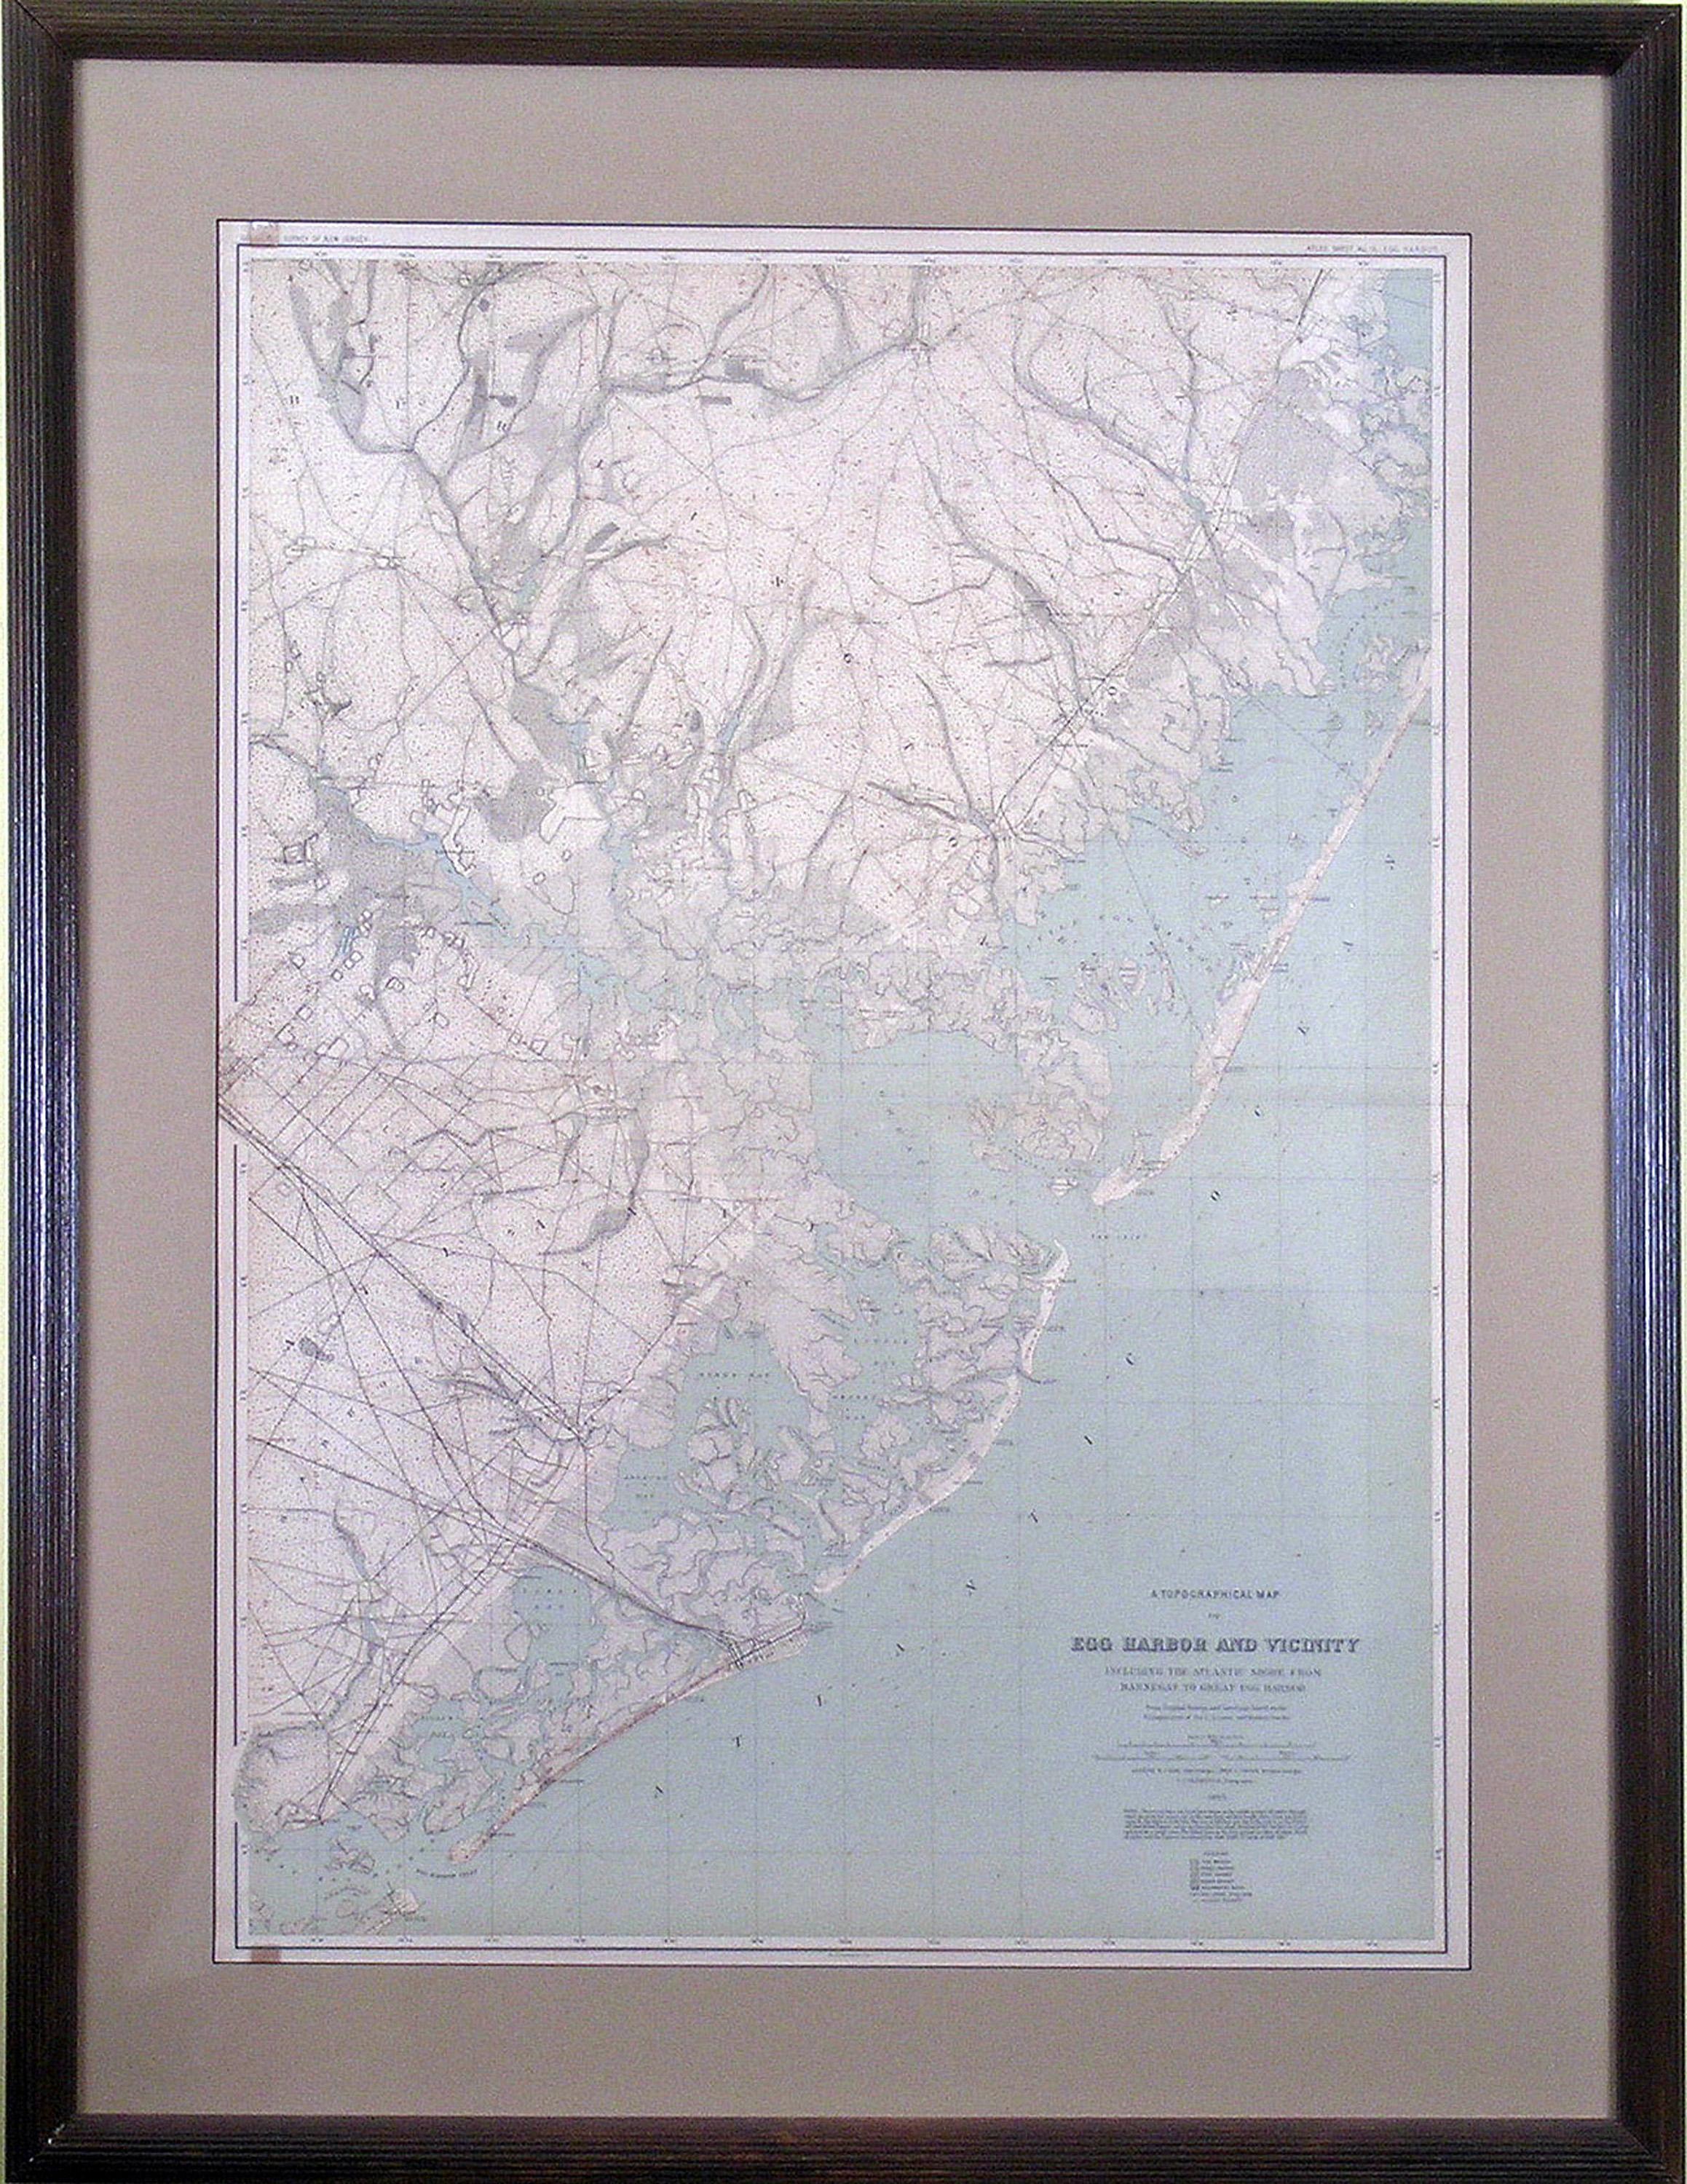 Egg Harbor and Vicinity (New Jersey) - Academic Print by Julius Bien